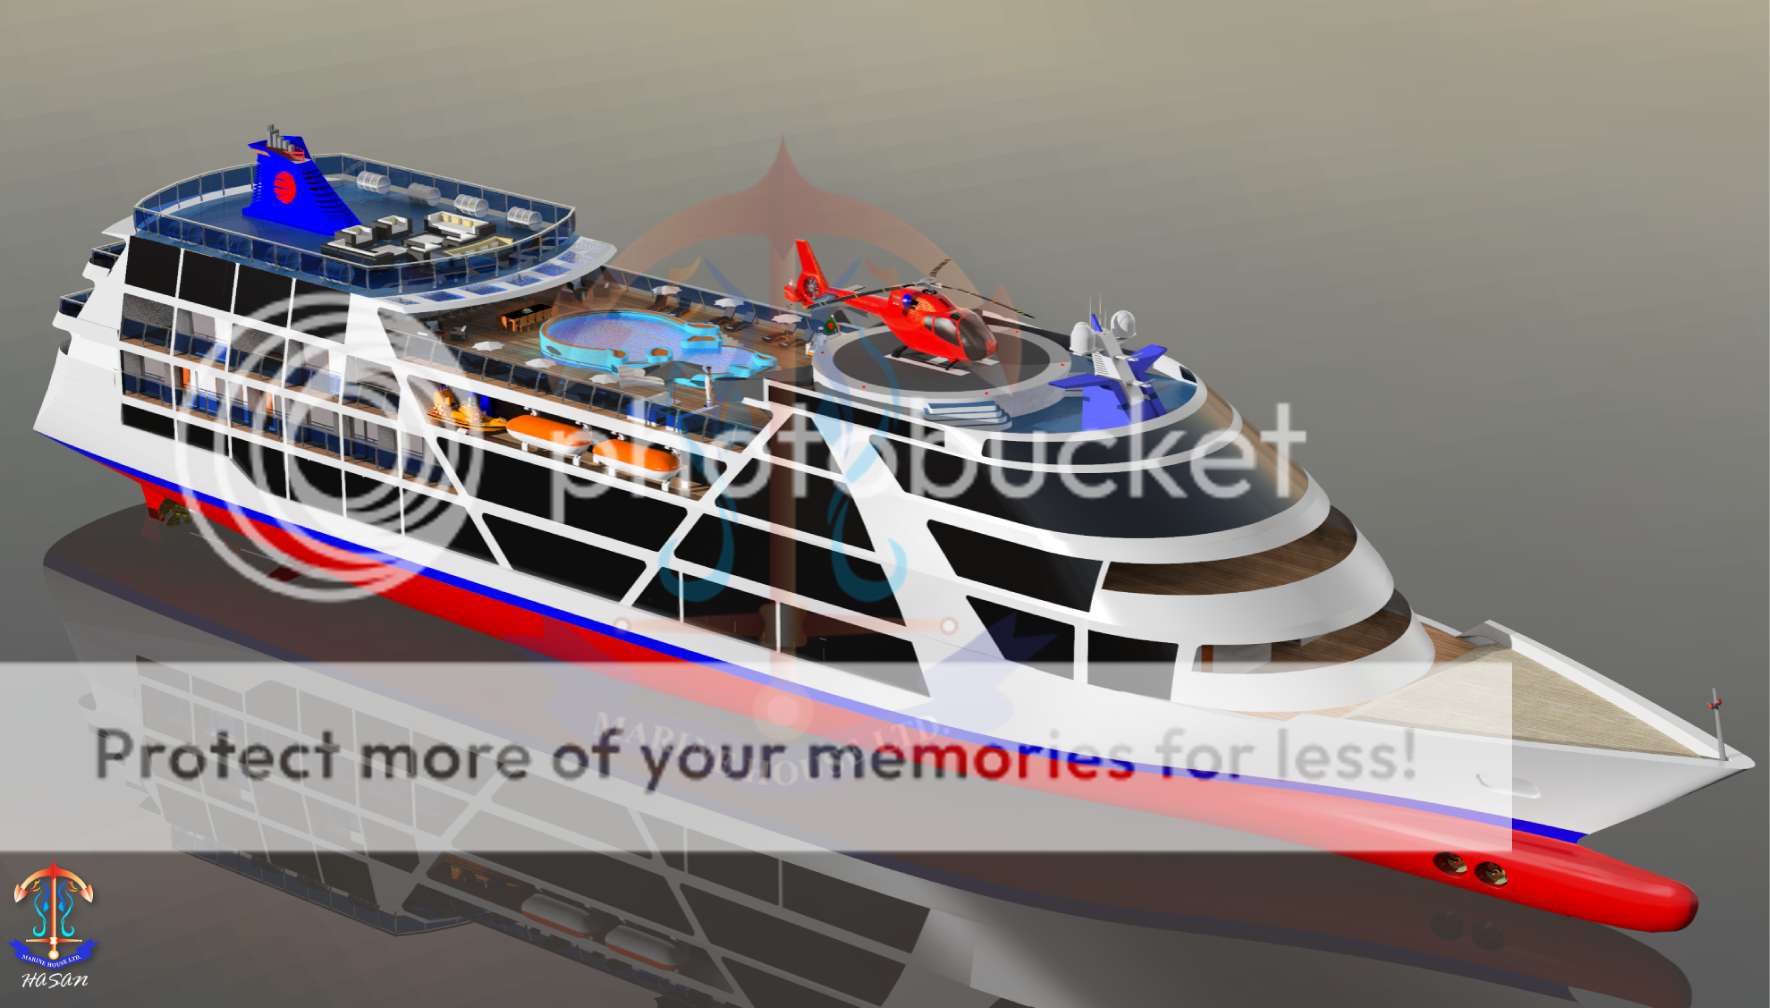 Cruise-Vessel1_zpsgnndhasb.png